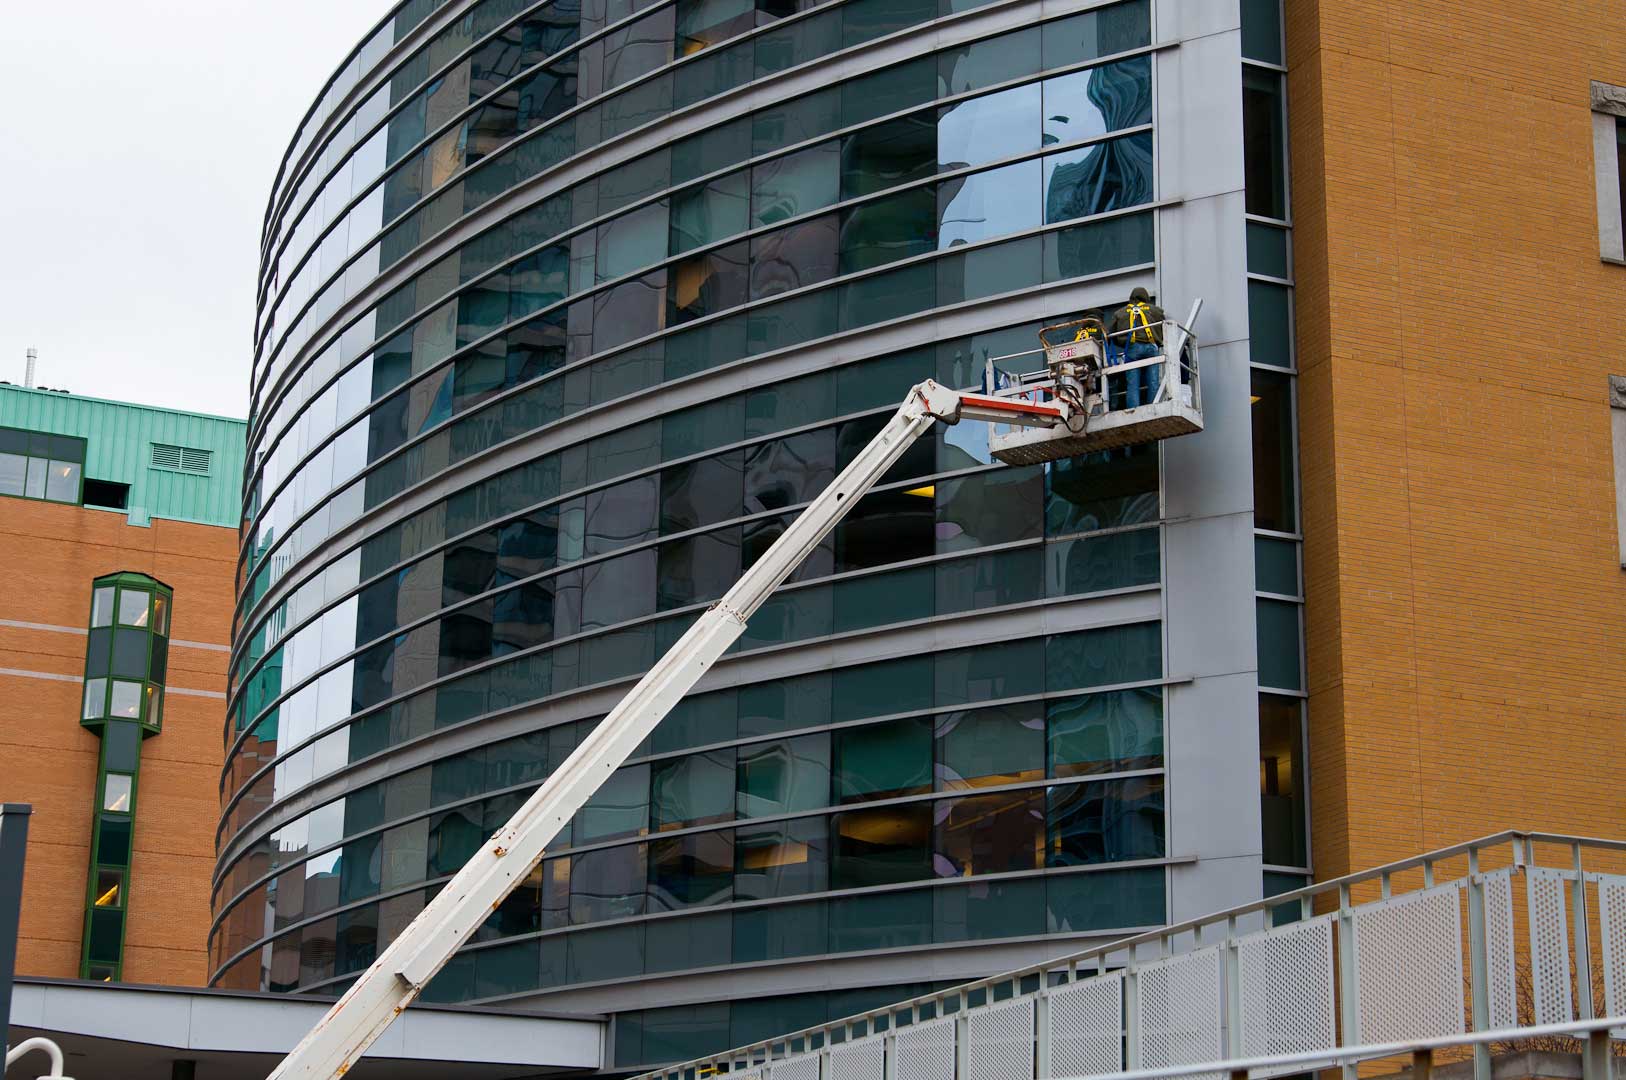 Telescoping Boom Truck Used to Access Building Facade in Toronto by Explore1